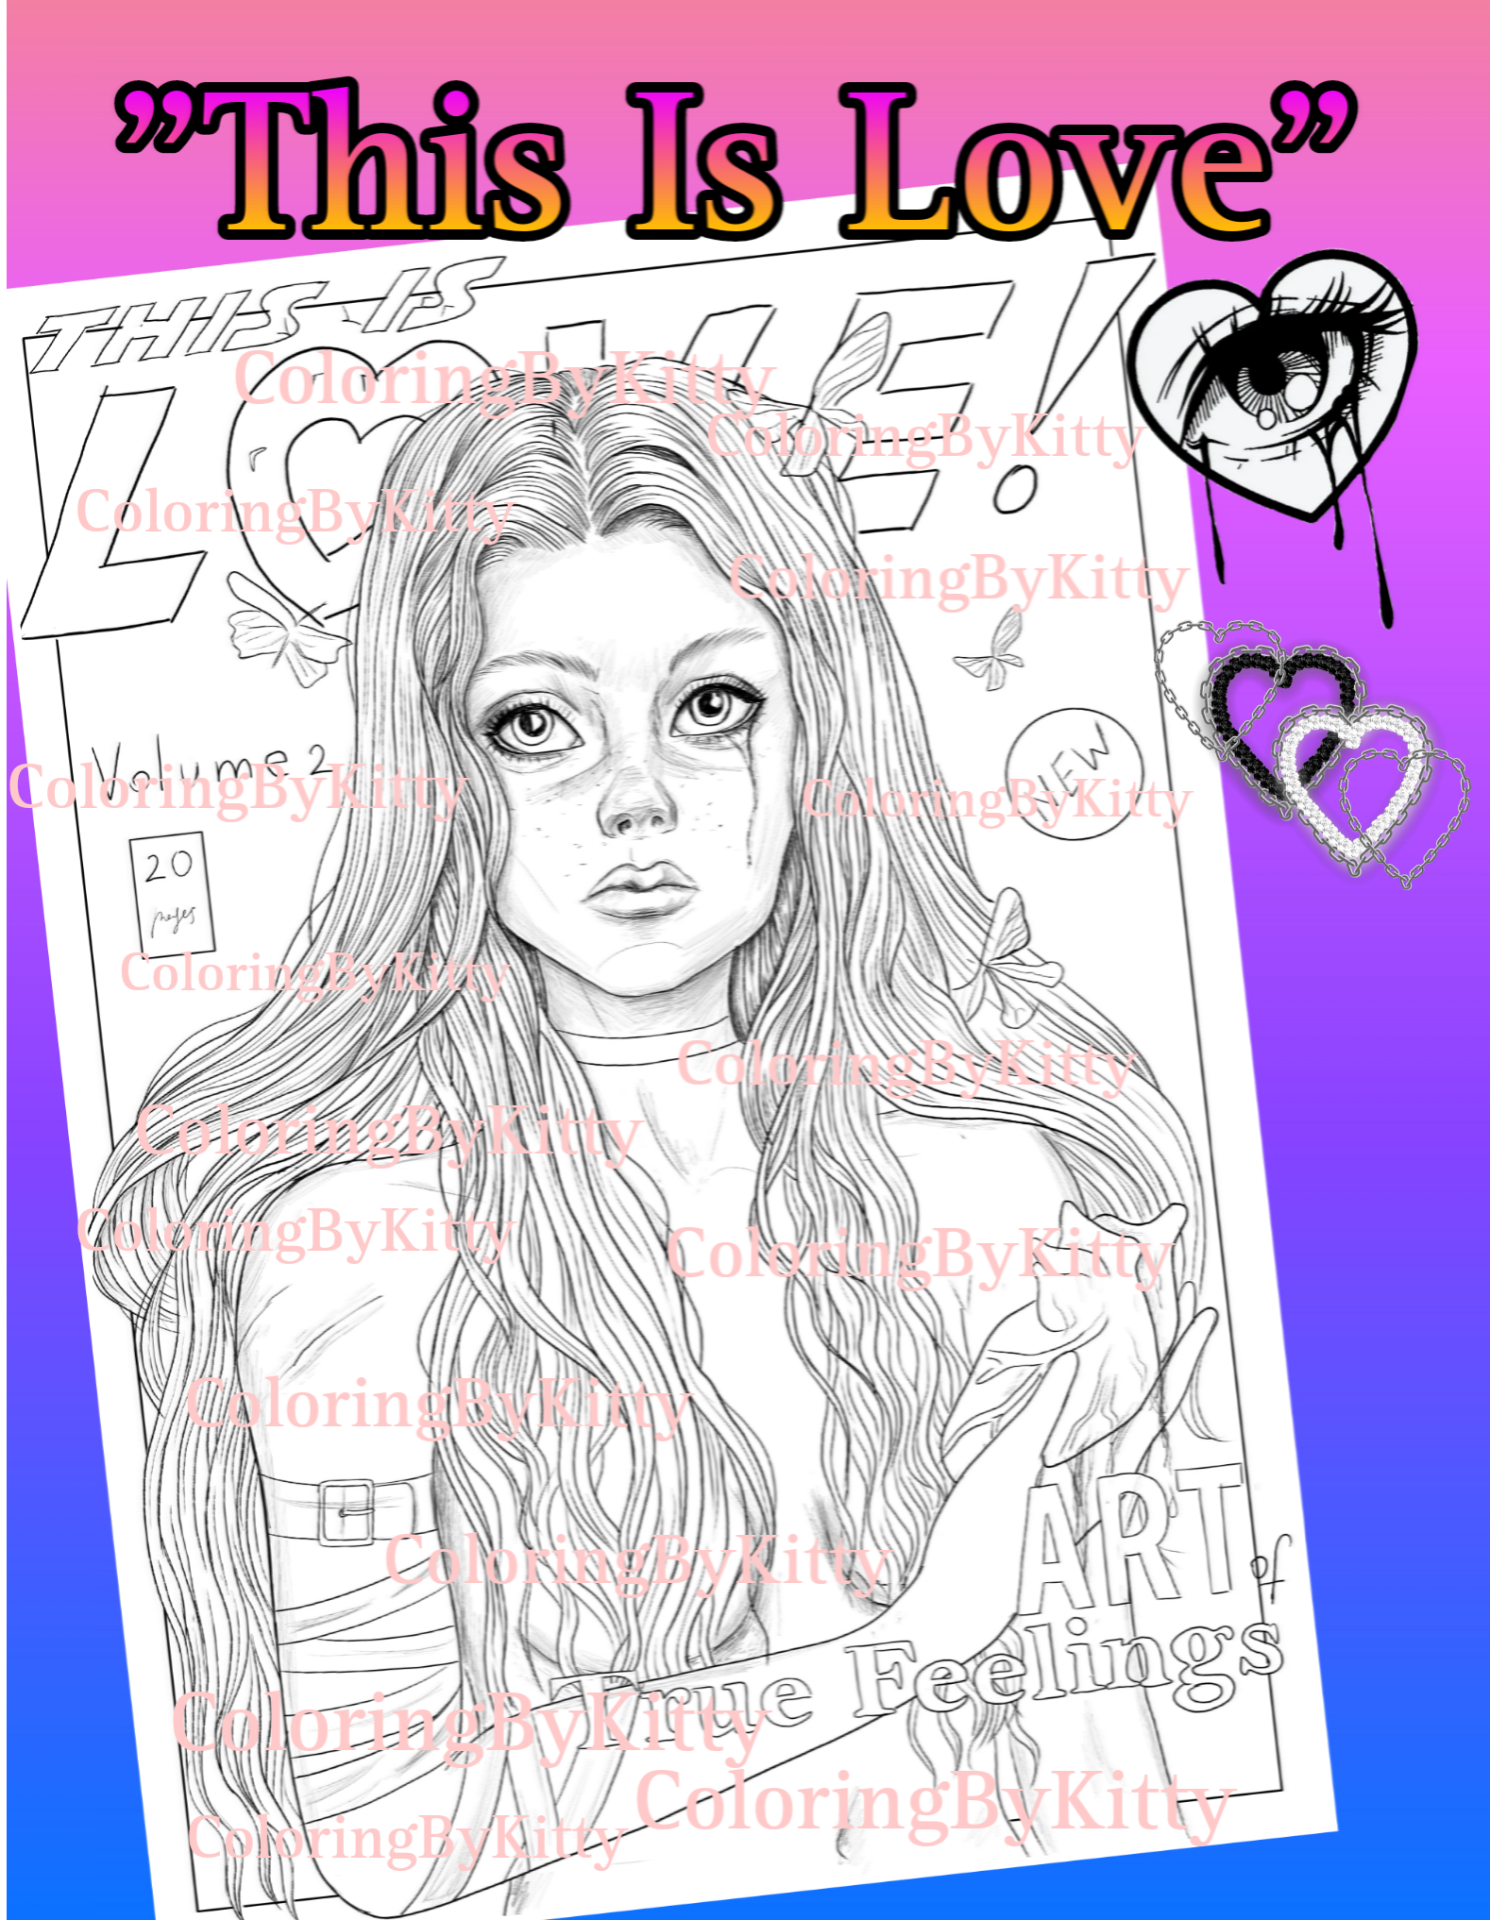 Single coloring page “This is Love”